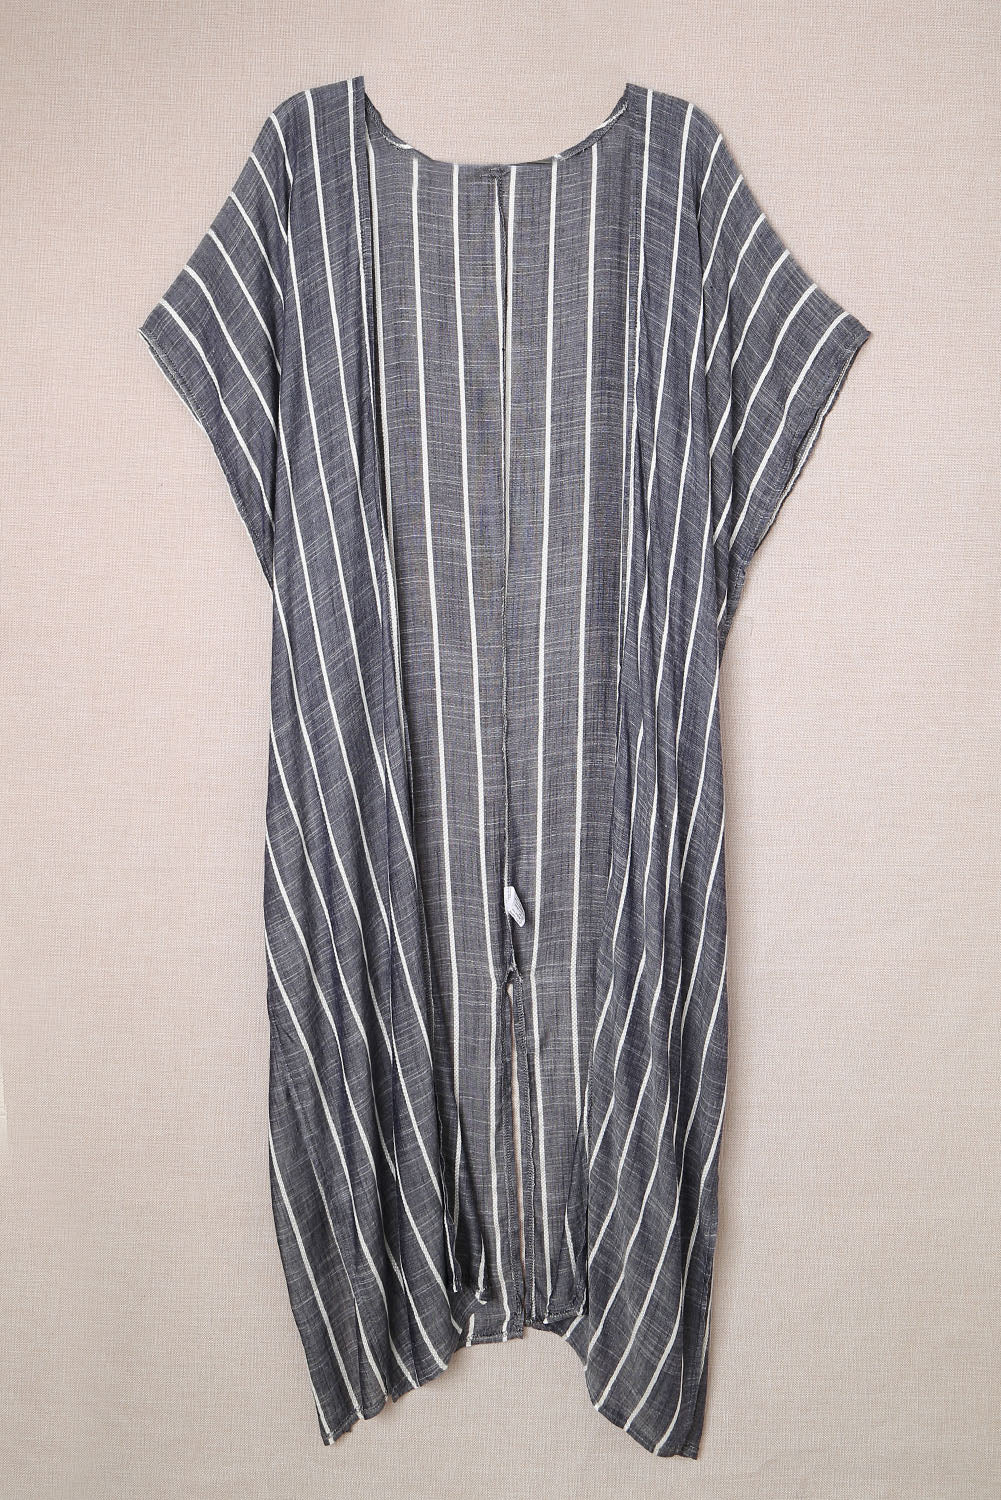 Striped Open Front Longline Cover Up